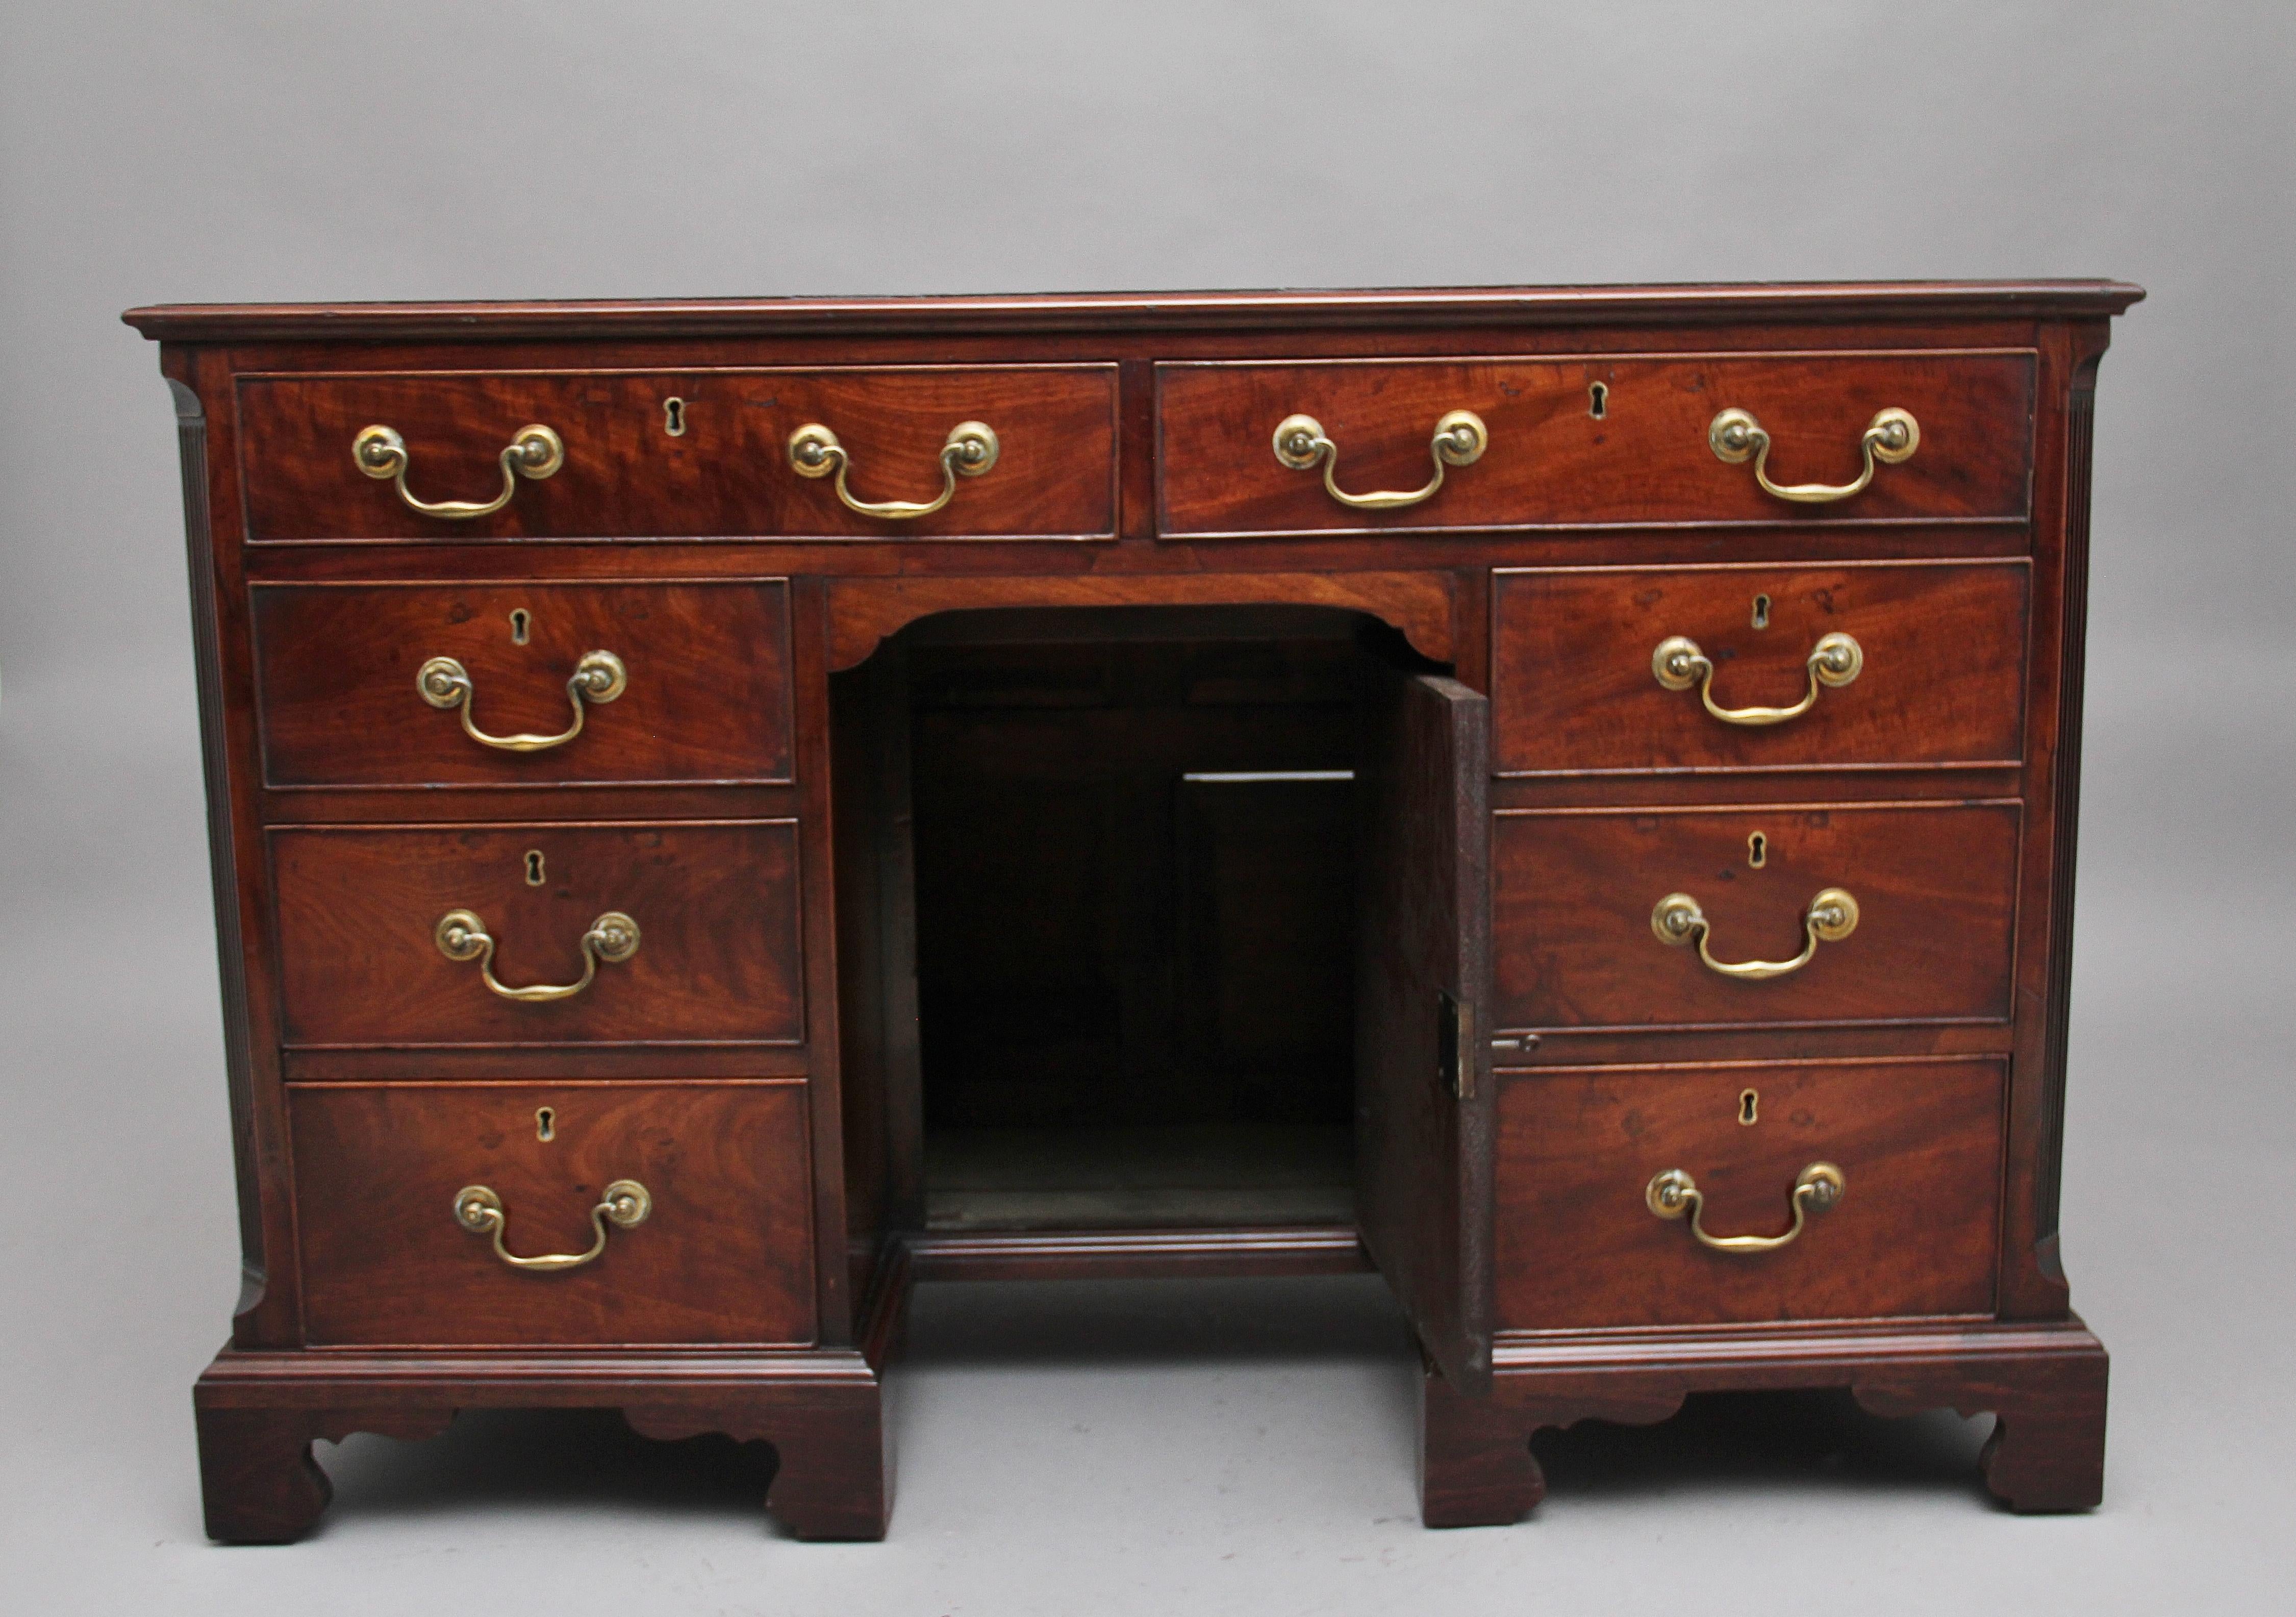 18th century mahogany kneehole desk, the rectangular moulded edge top having a brown leather writing surface decorated with blind and gold tooling, a selection of eight graduated oak lined drawers with original brass swan neck handles, lovely